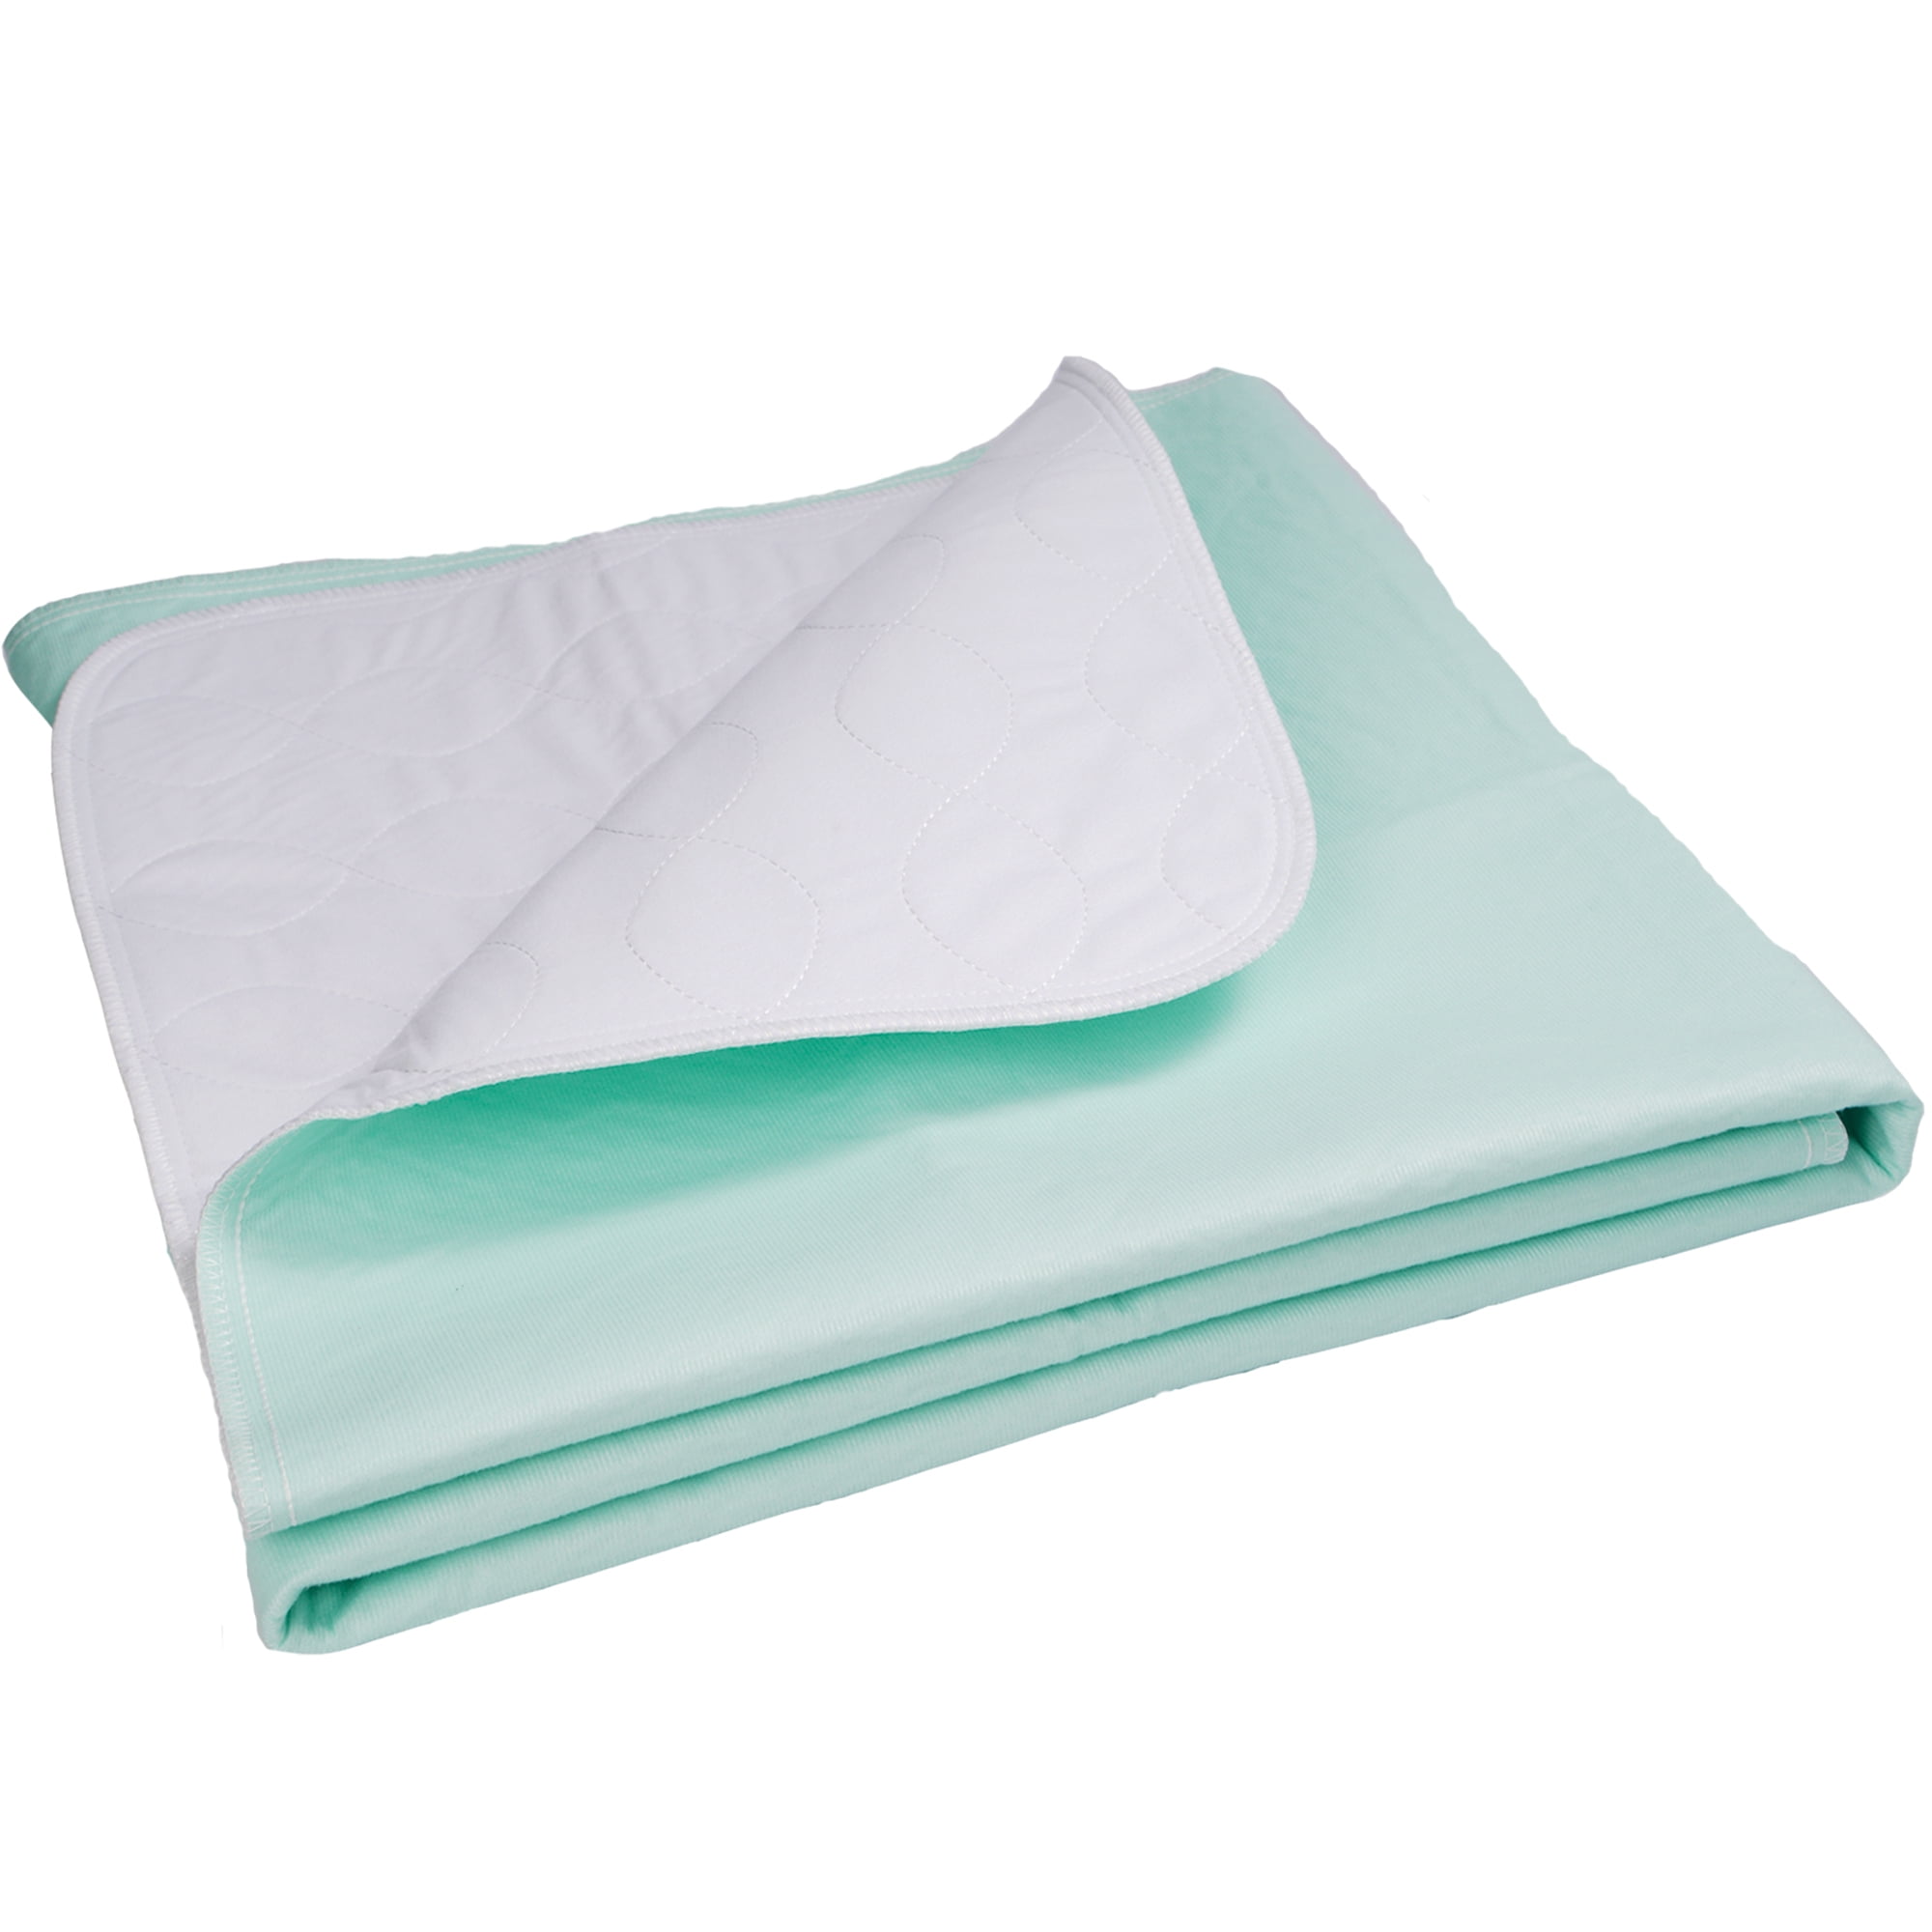 KEKOY 4 Layer Reusable Incontinence Bed Underpad, Washable Super